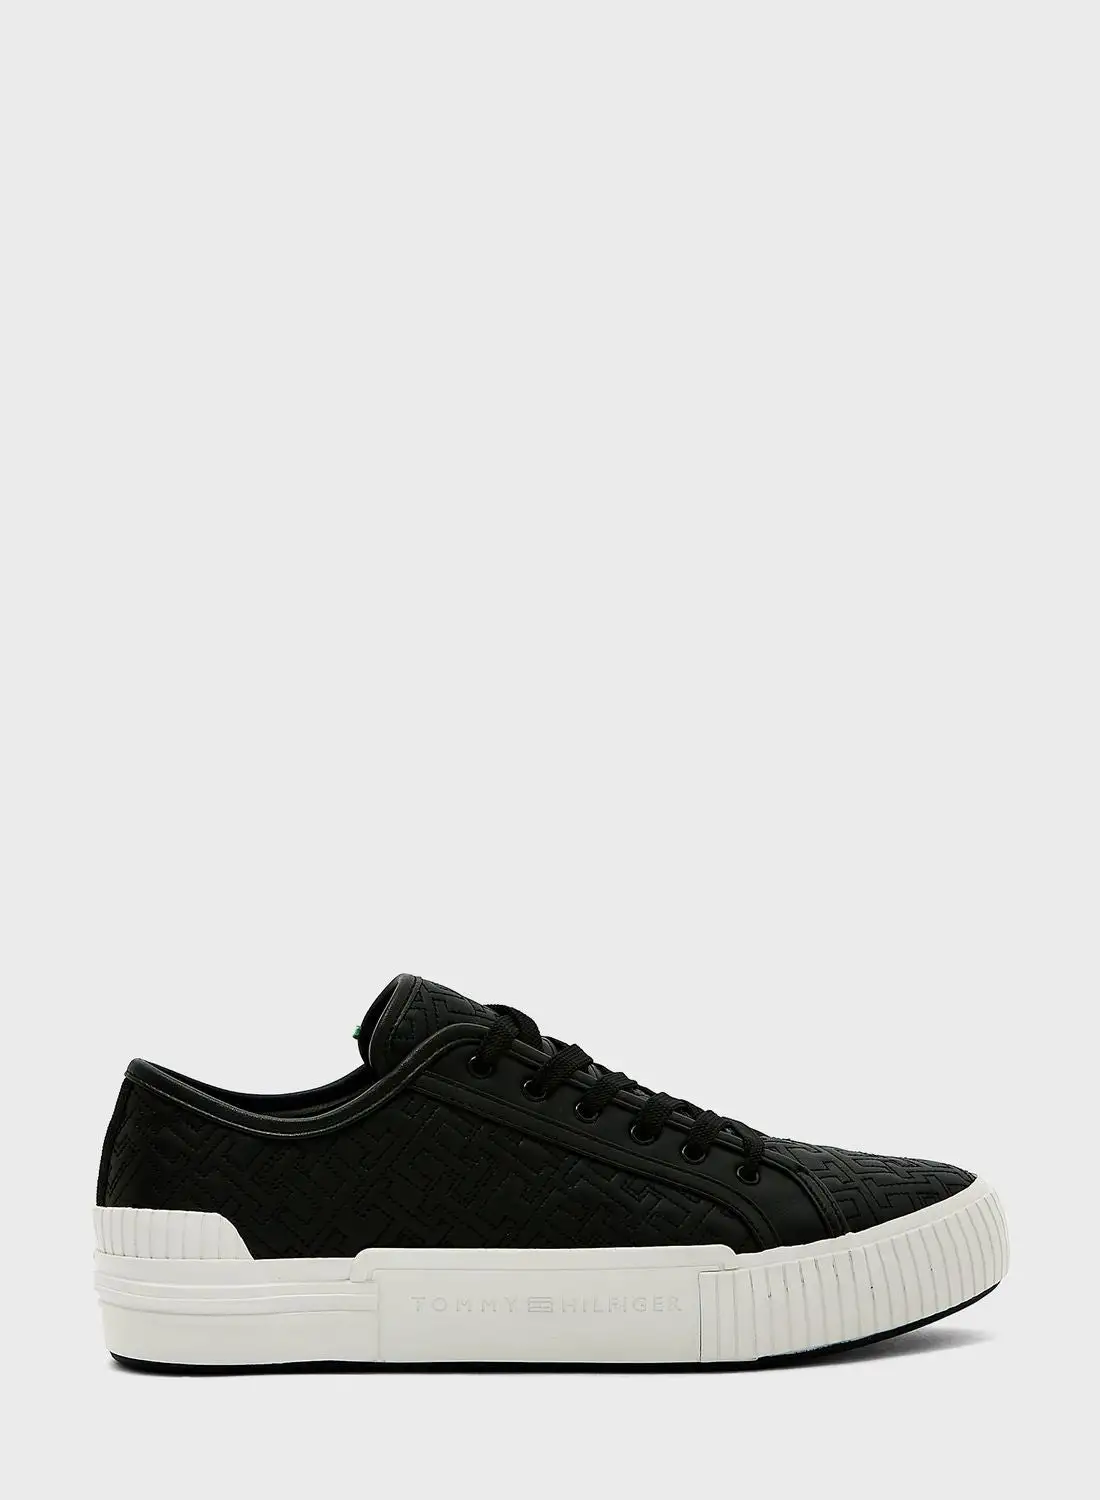 TOMMY HILFIGER Vulcanized Monogram Low Top Sneakers